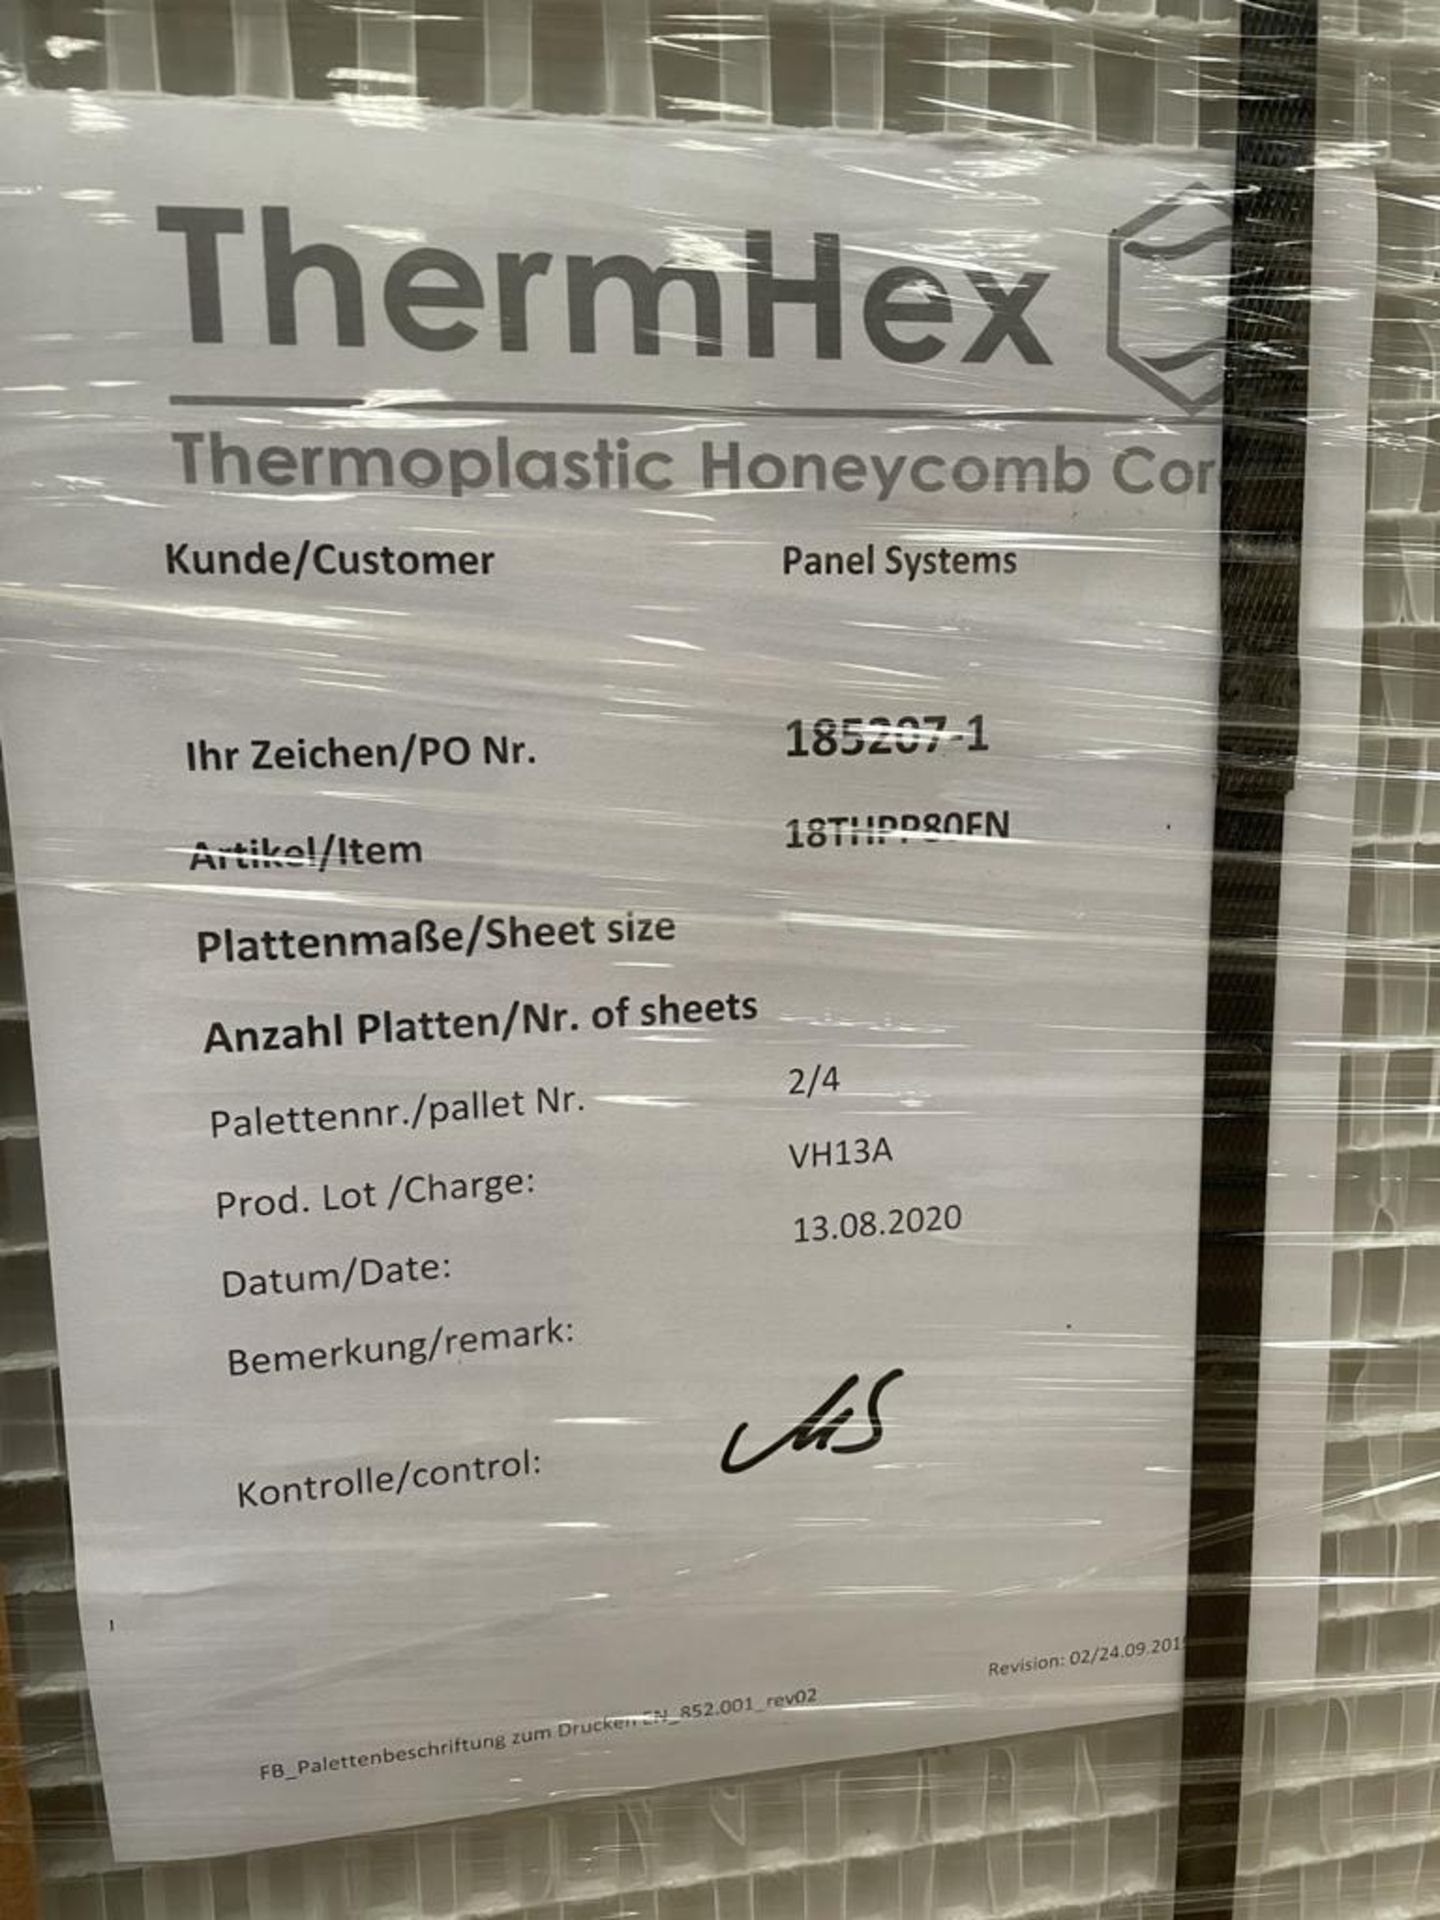 12 x ThermHex Thermoplastic Honeycomb Core Panels - Size 3175 x 1210 x 20mm - New Stock - - Image 2 of 7